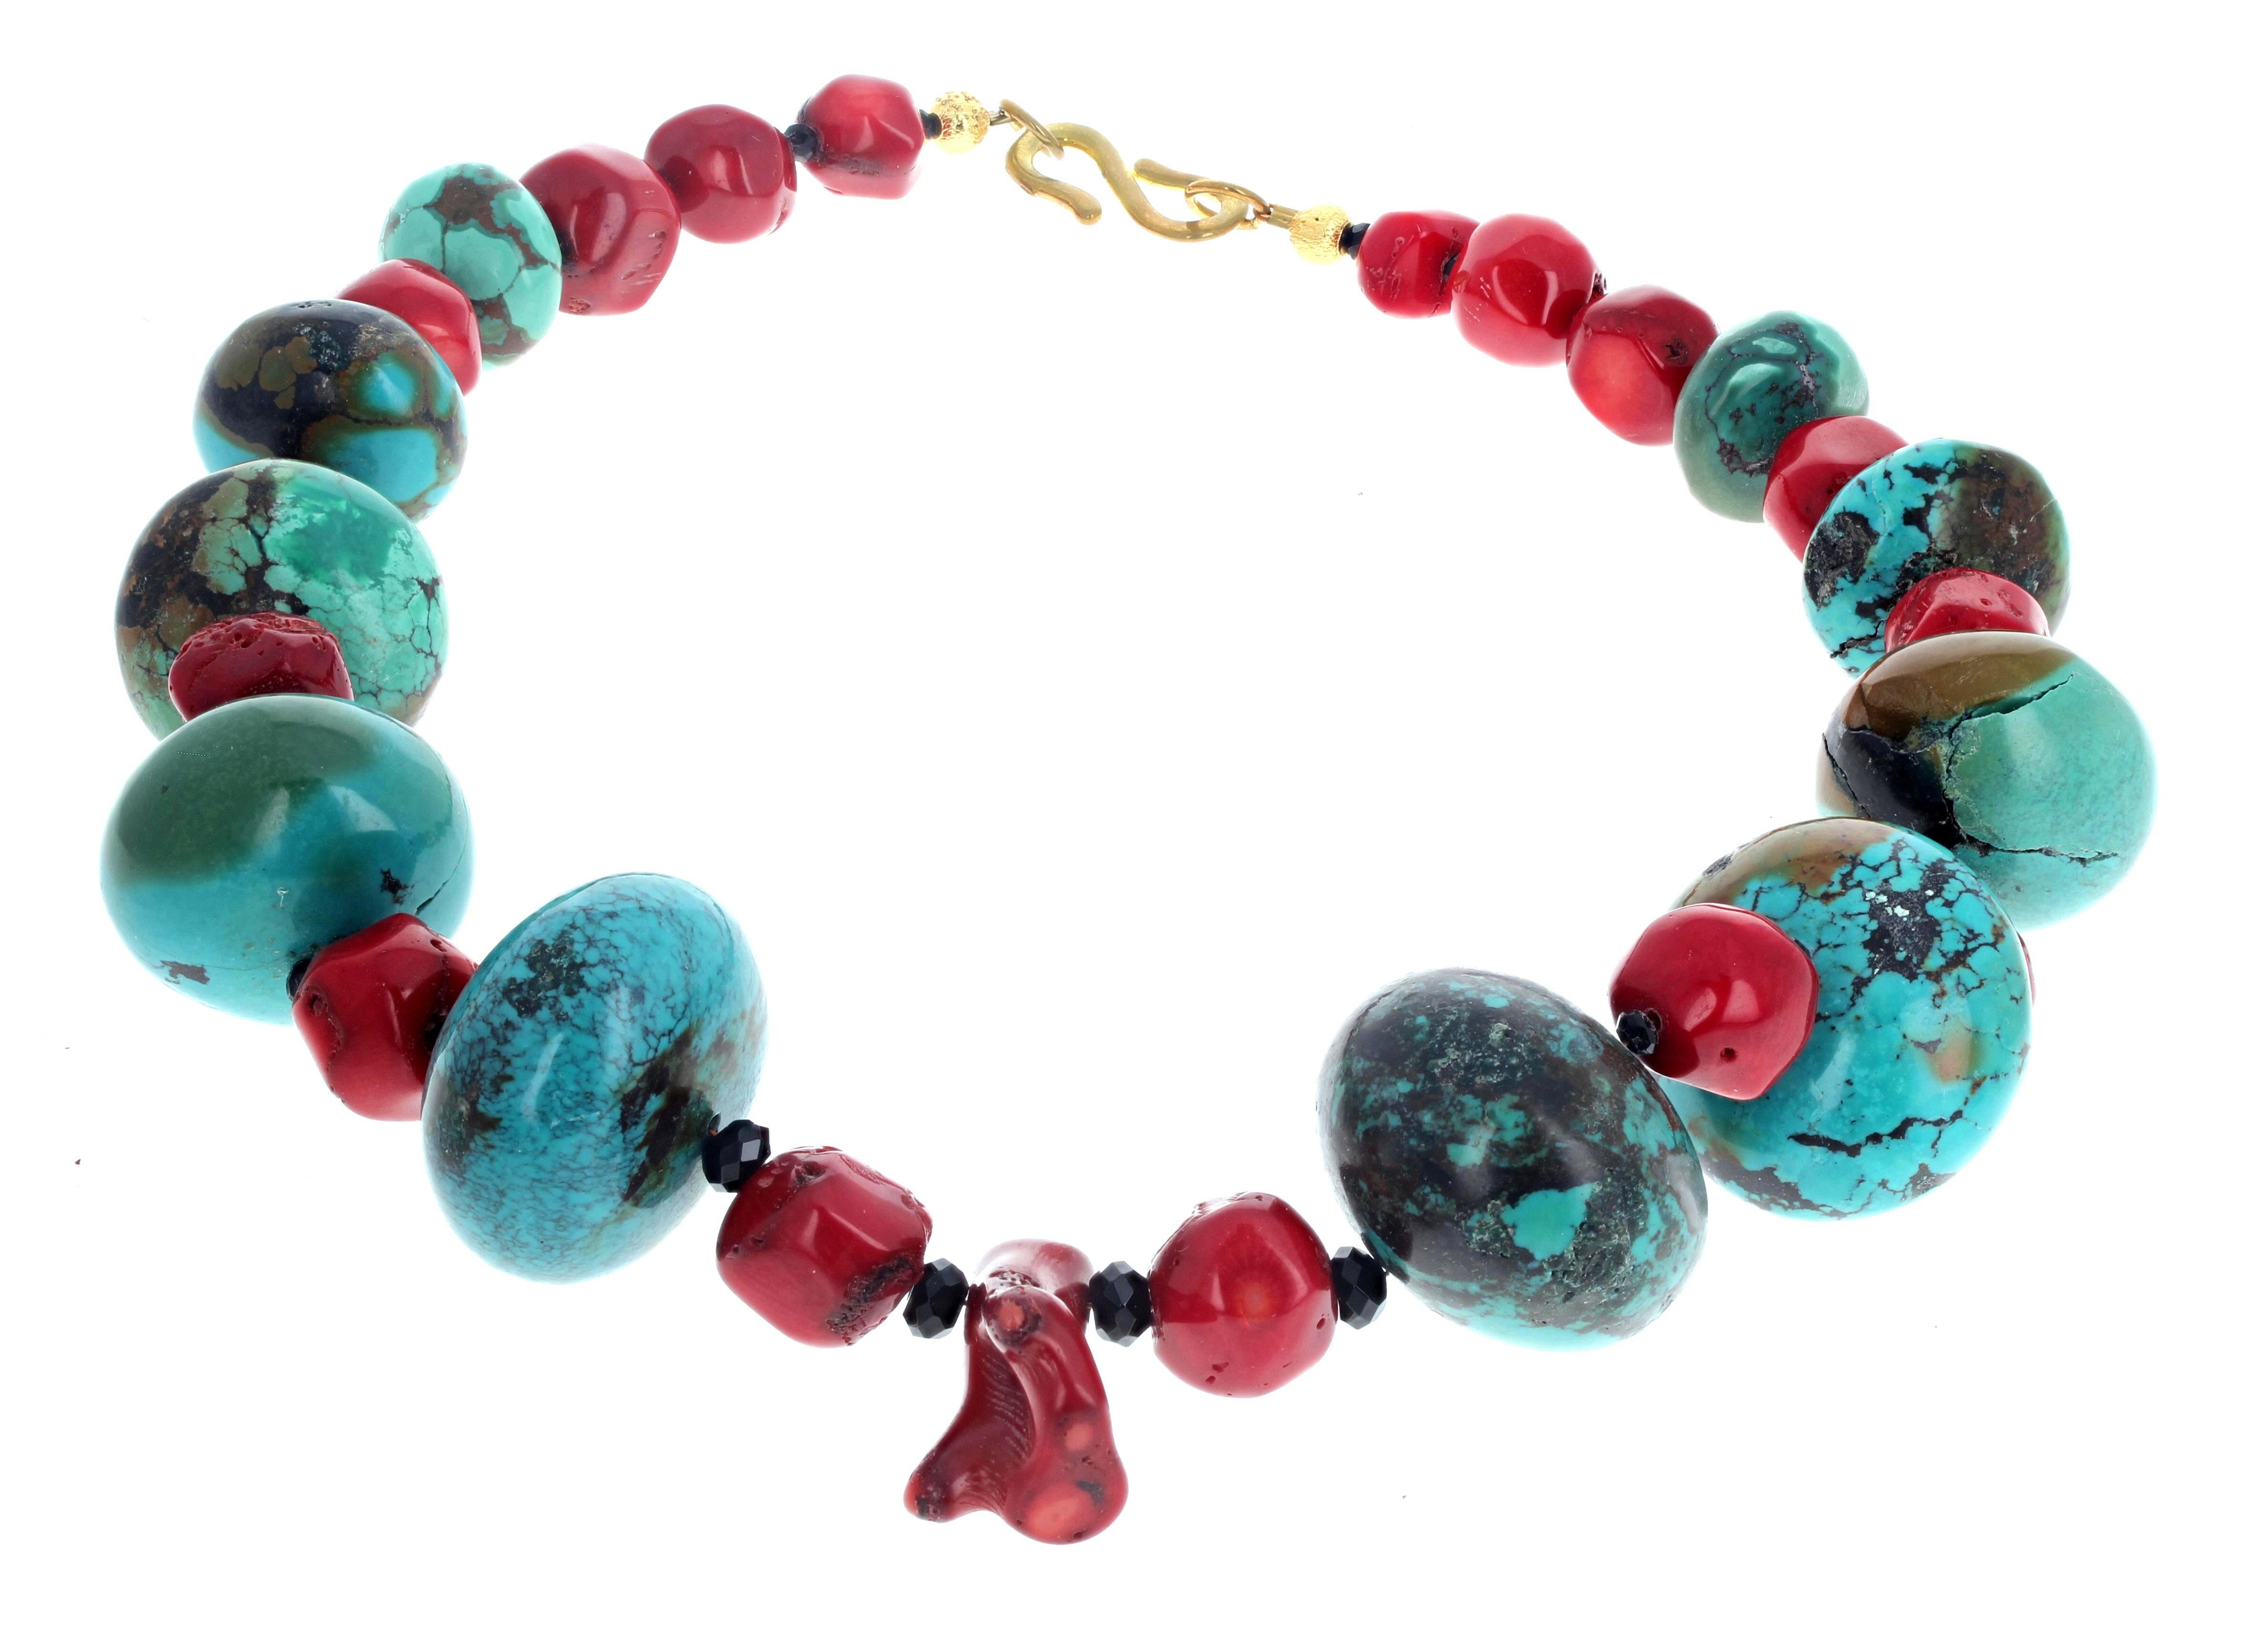 These huge polished natural Turquoises are enhanced with chunky polished natural red Bamboo Coral composing this wonderful 20 1/2 inch long necklace.  The largest Turquoises are approximately 32mm and the Coral approximately 15 1/2mm.  The clasp is